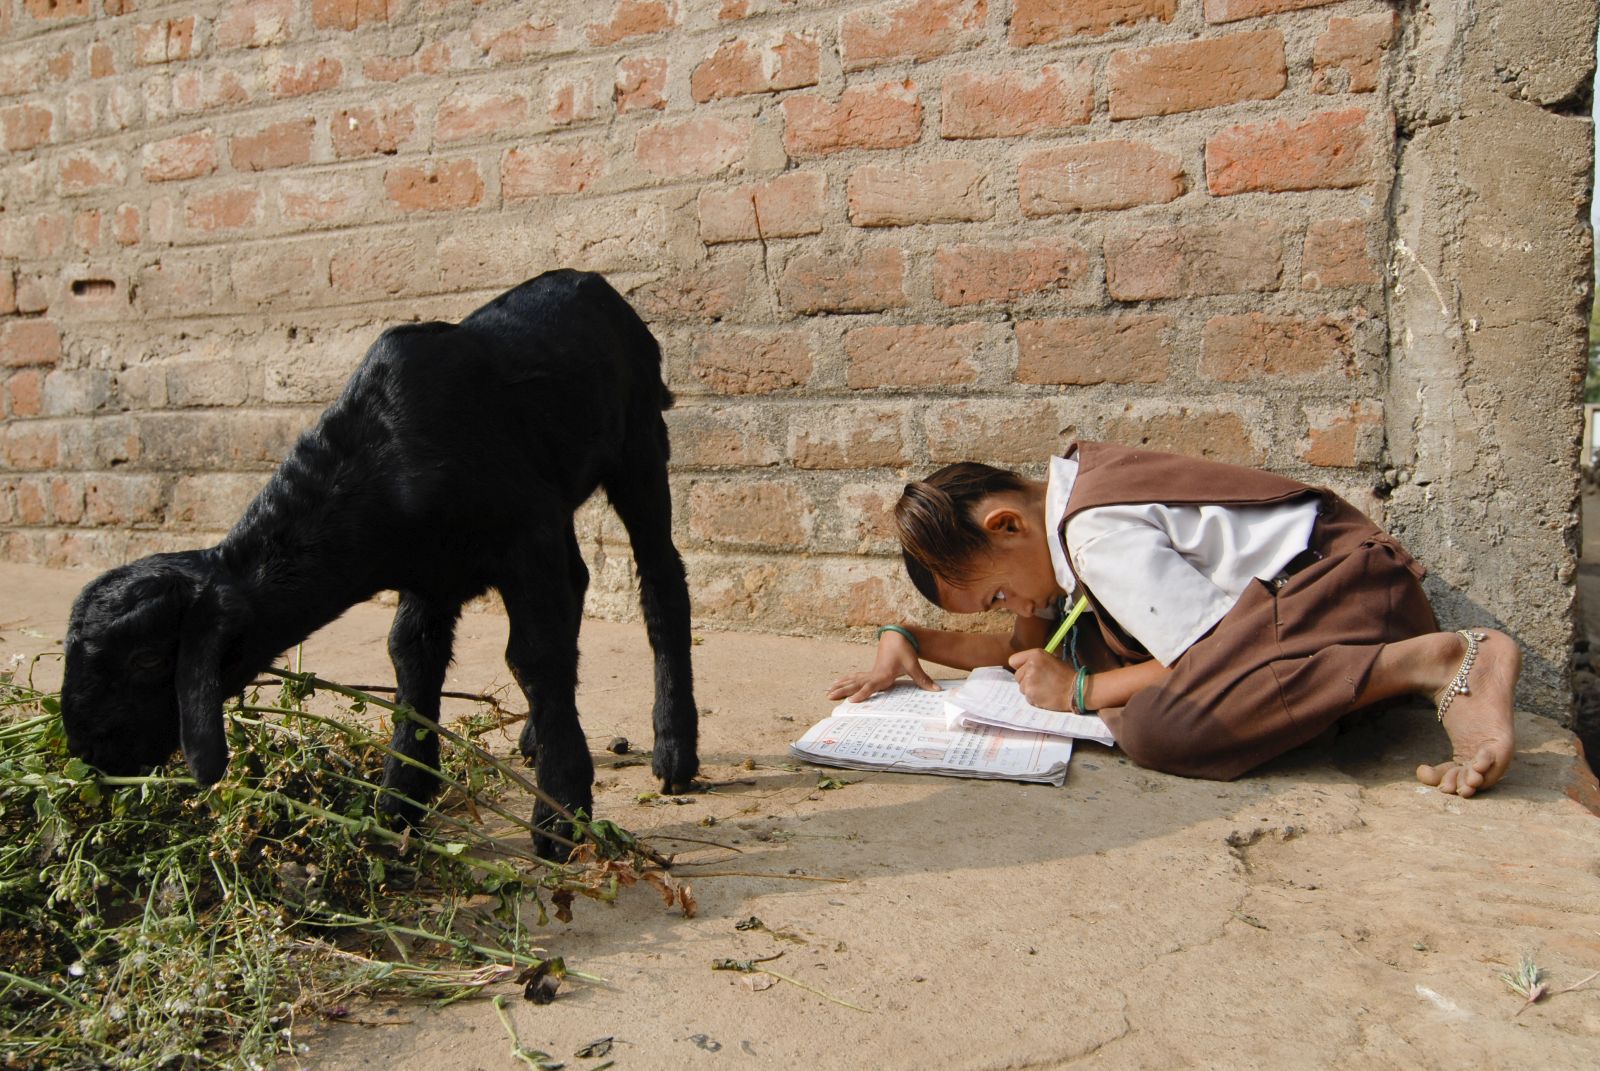 Increasingly, even villagers want their daughters to learn: girl doing homework in Madhya Pradesh in 2007.